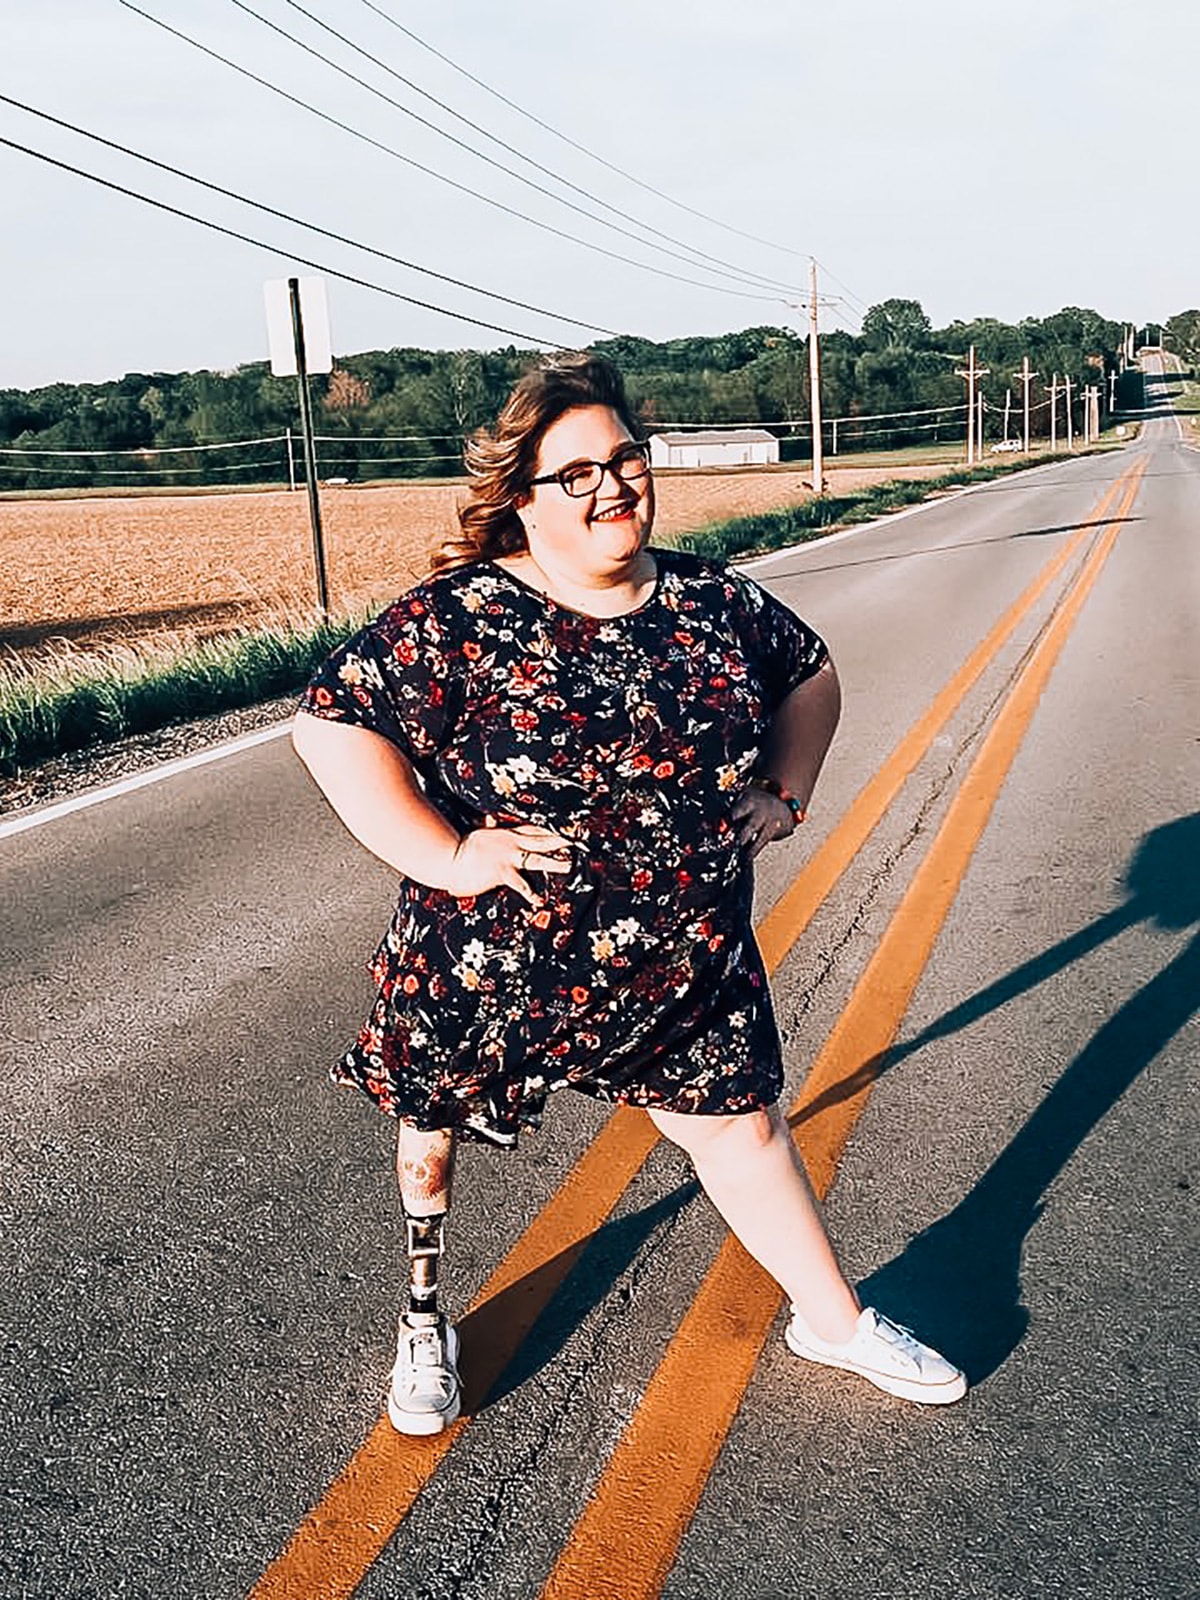 I'm an amputee and I don't need Love is Blind to be more body diverse